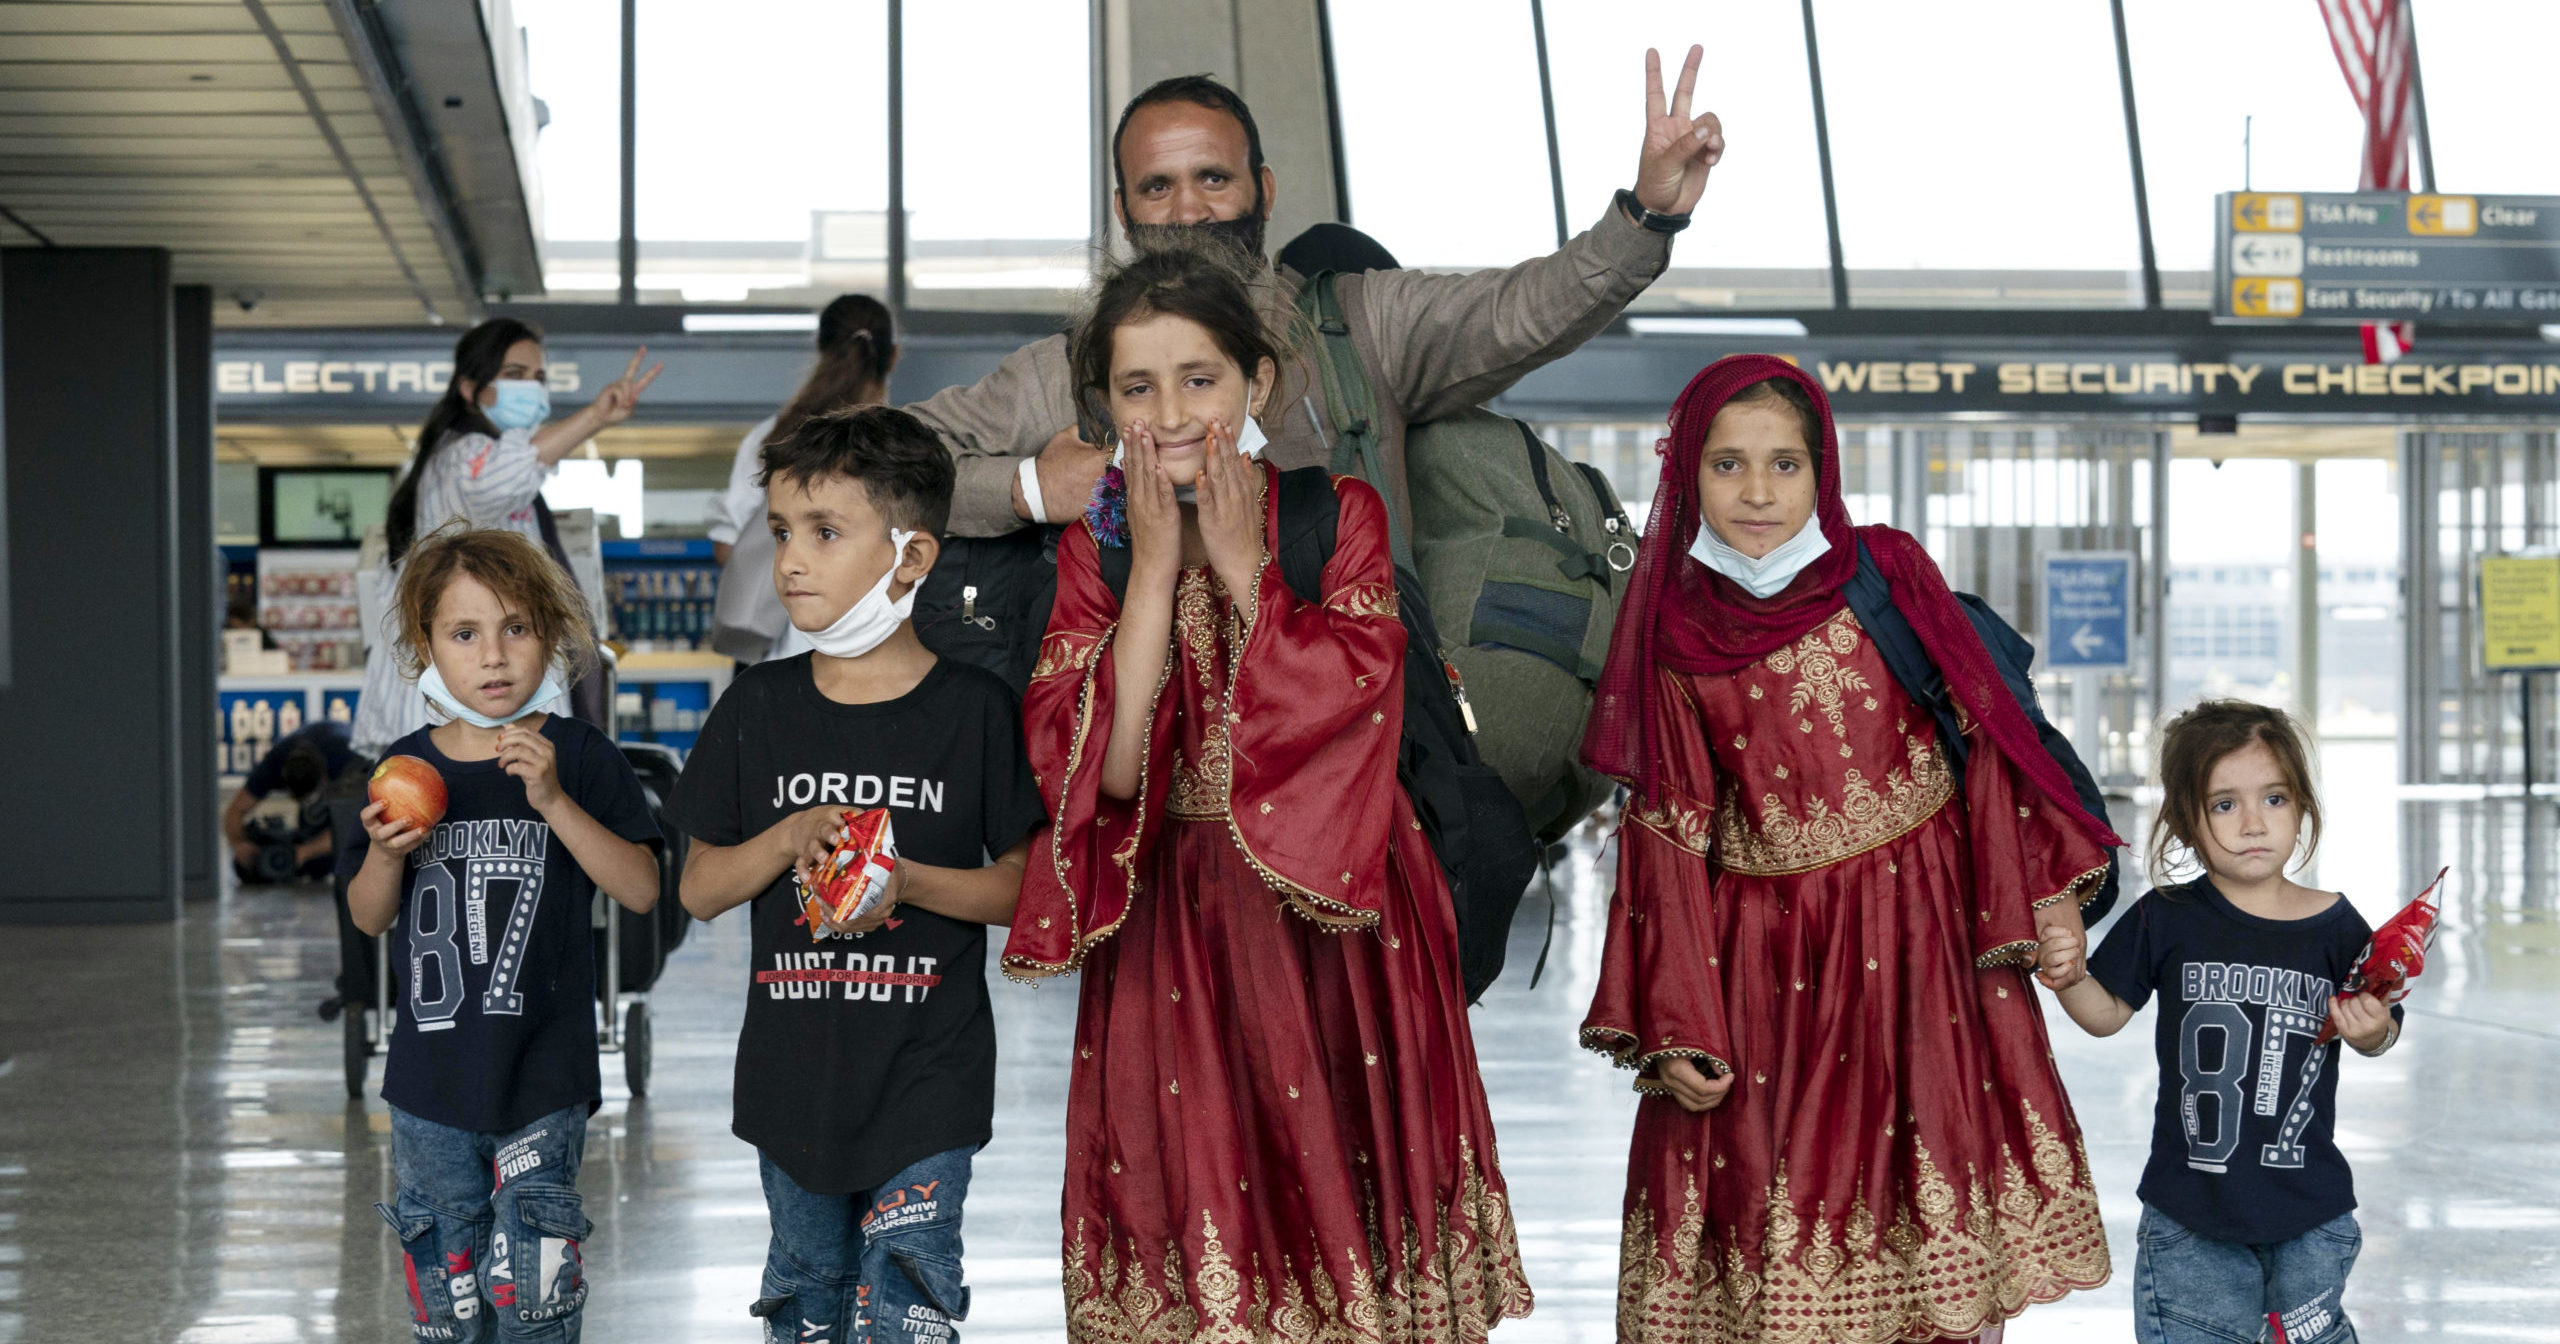 Families evacuated from Kabul, Afghanistan, walk through the terminal after arriving at Washington Dulles International Airport in Chantilly, Virginia, on Aug. 27, 2021.